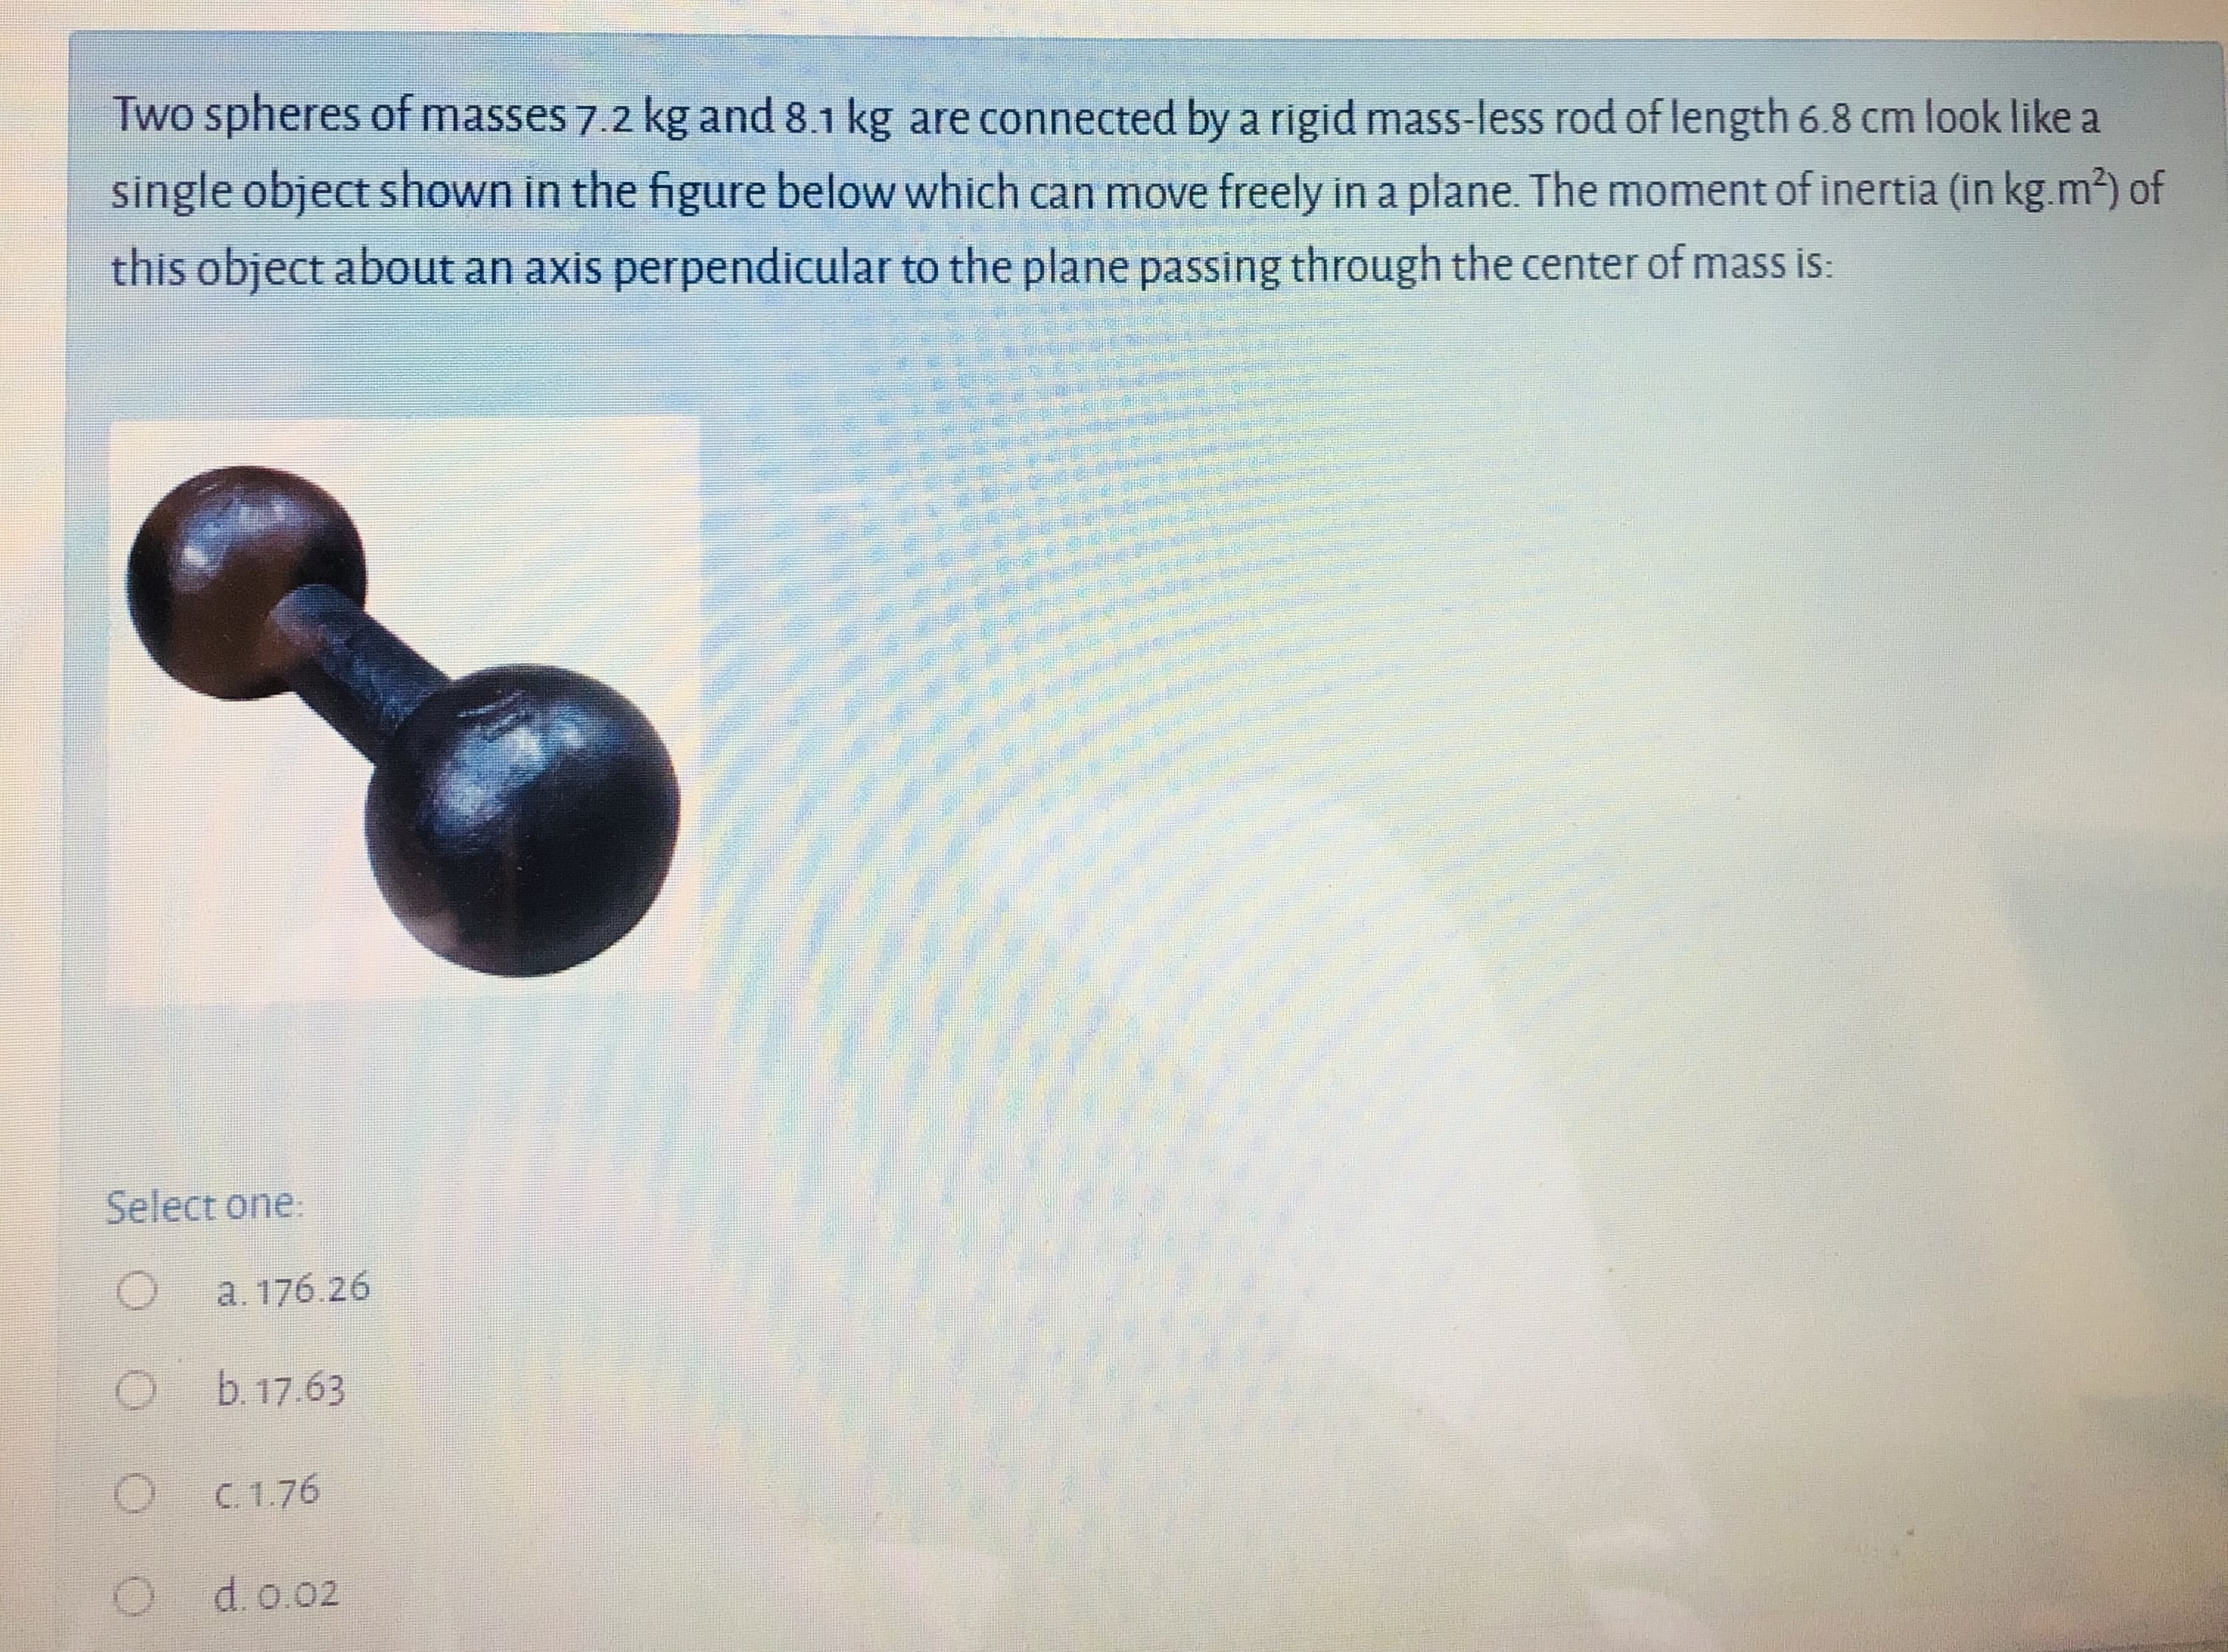 Two spheres of masses 7.2 kg and 8.1 kg are connected by a rigid mass-less rod of length 6.8 cm look like a
single object shown in the figure below which can move freely in a plane. The moment of inertia (in kg.m2) of
this object about an axis perpendicular to the plane passing through the center of mass is:
